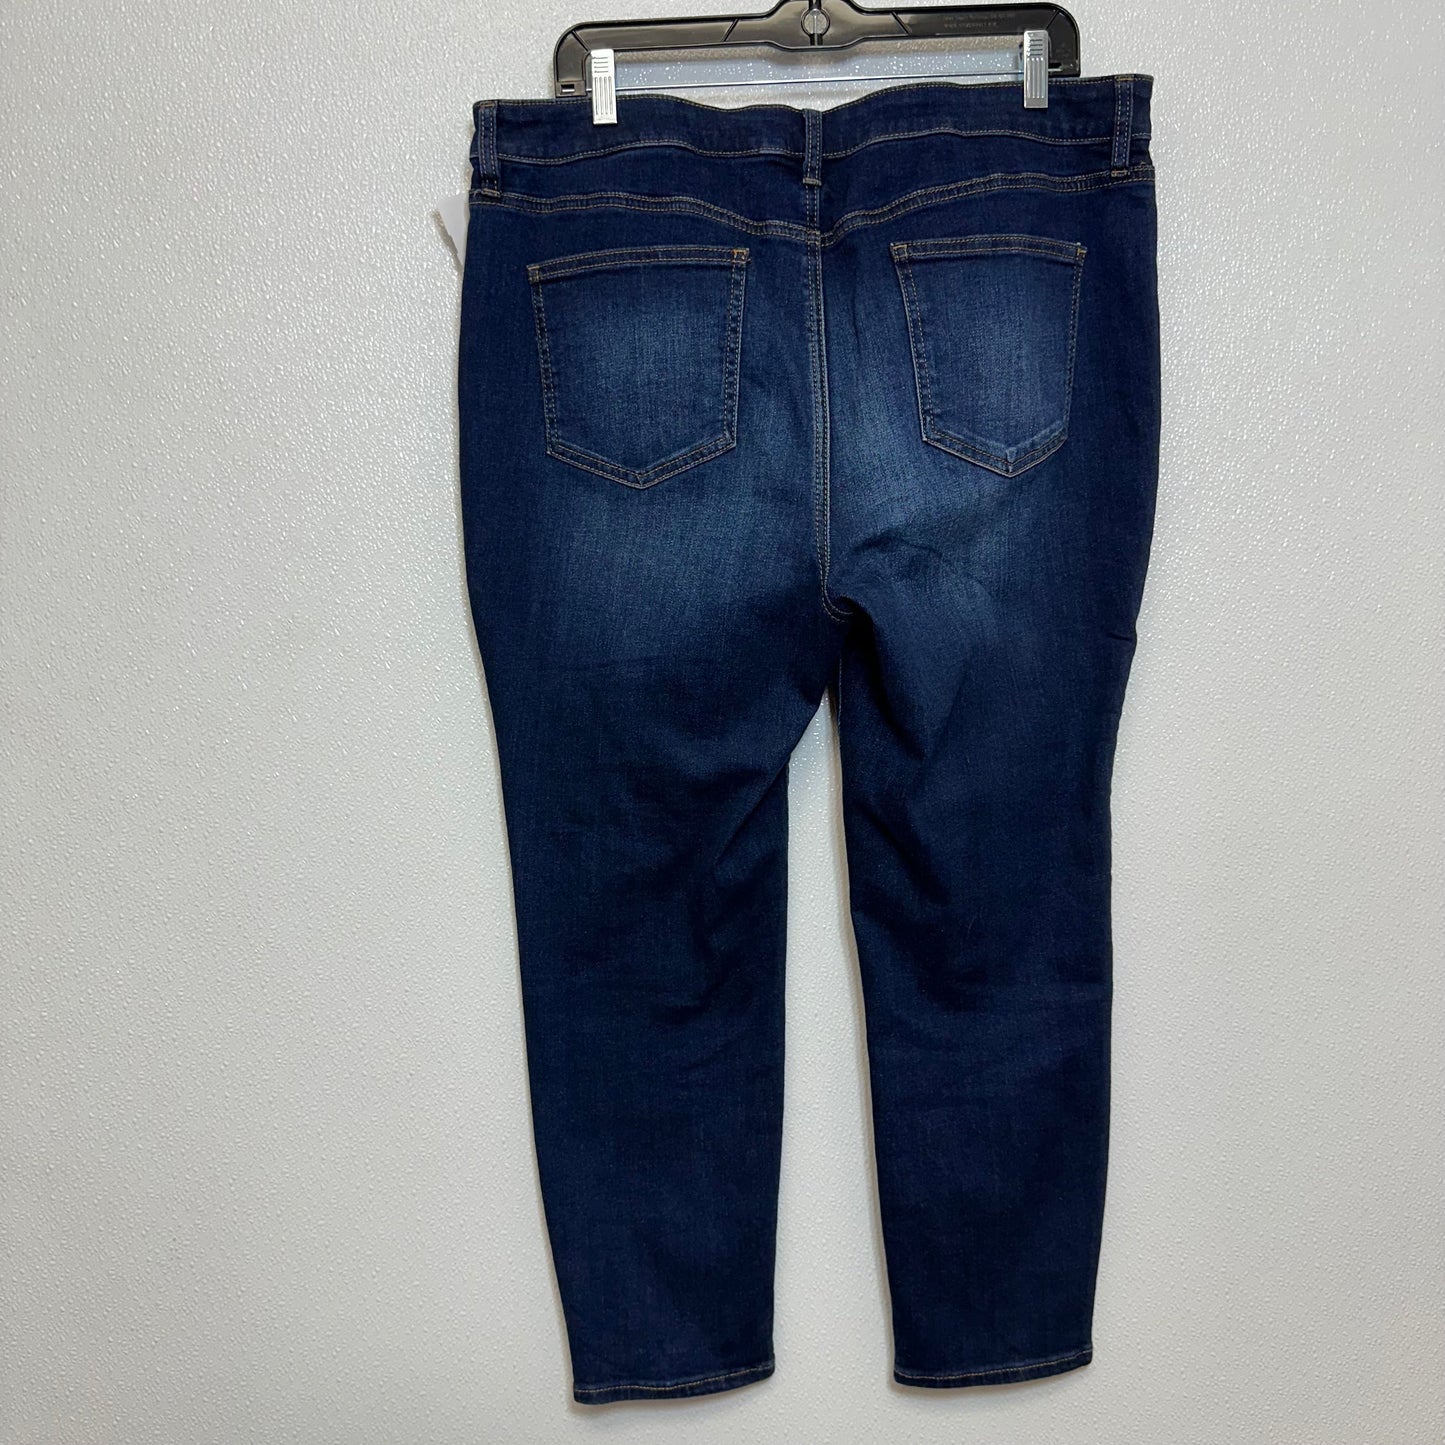 Jeans Straight By Chicos  Size: 14petite